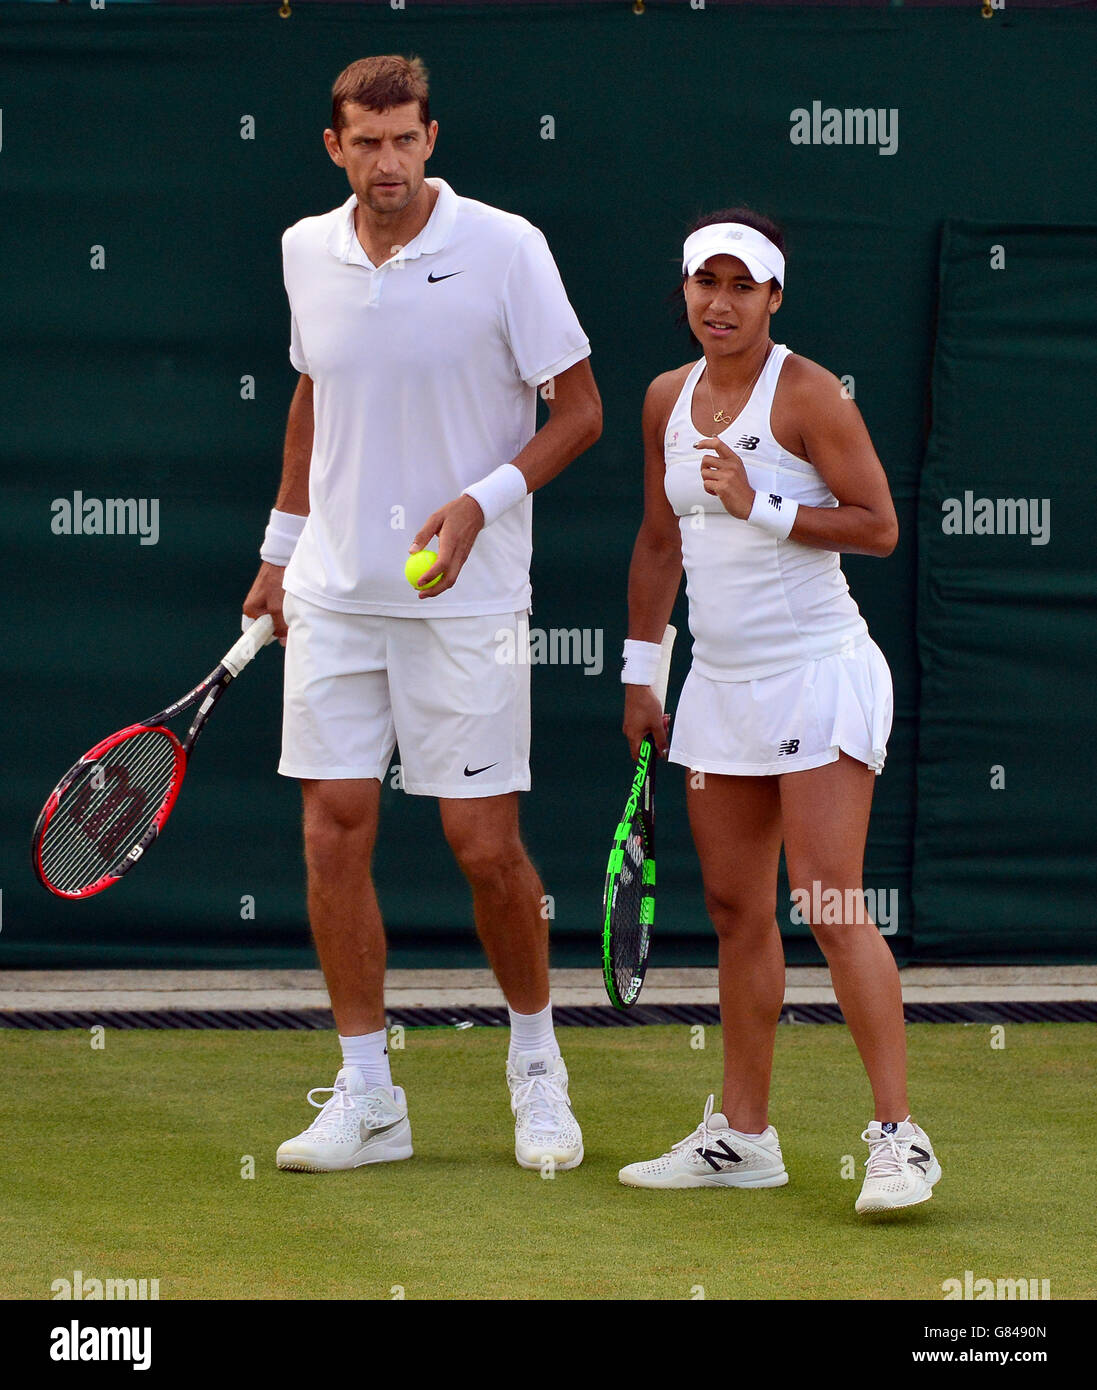 Heather Watson and Max Mirnyi in their doubles match during day Six of the Wimbledon Championships at the All England Lawn Tennis and Croquet Club, Wimbledon. Stock Photo